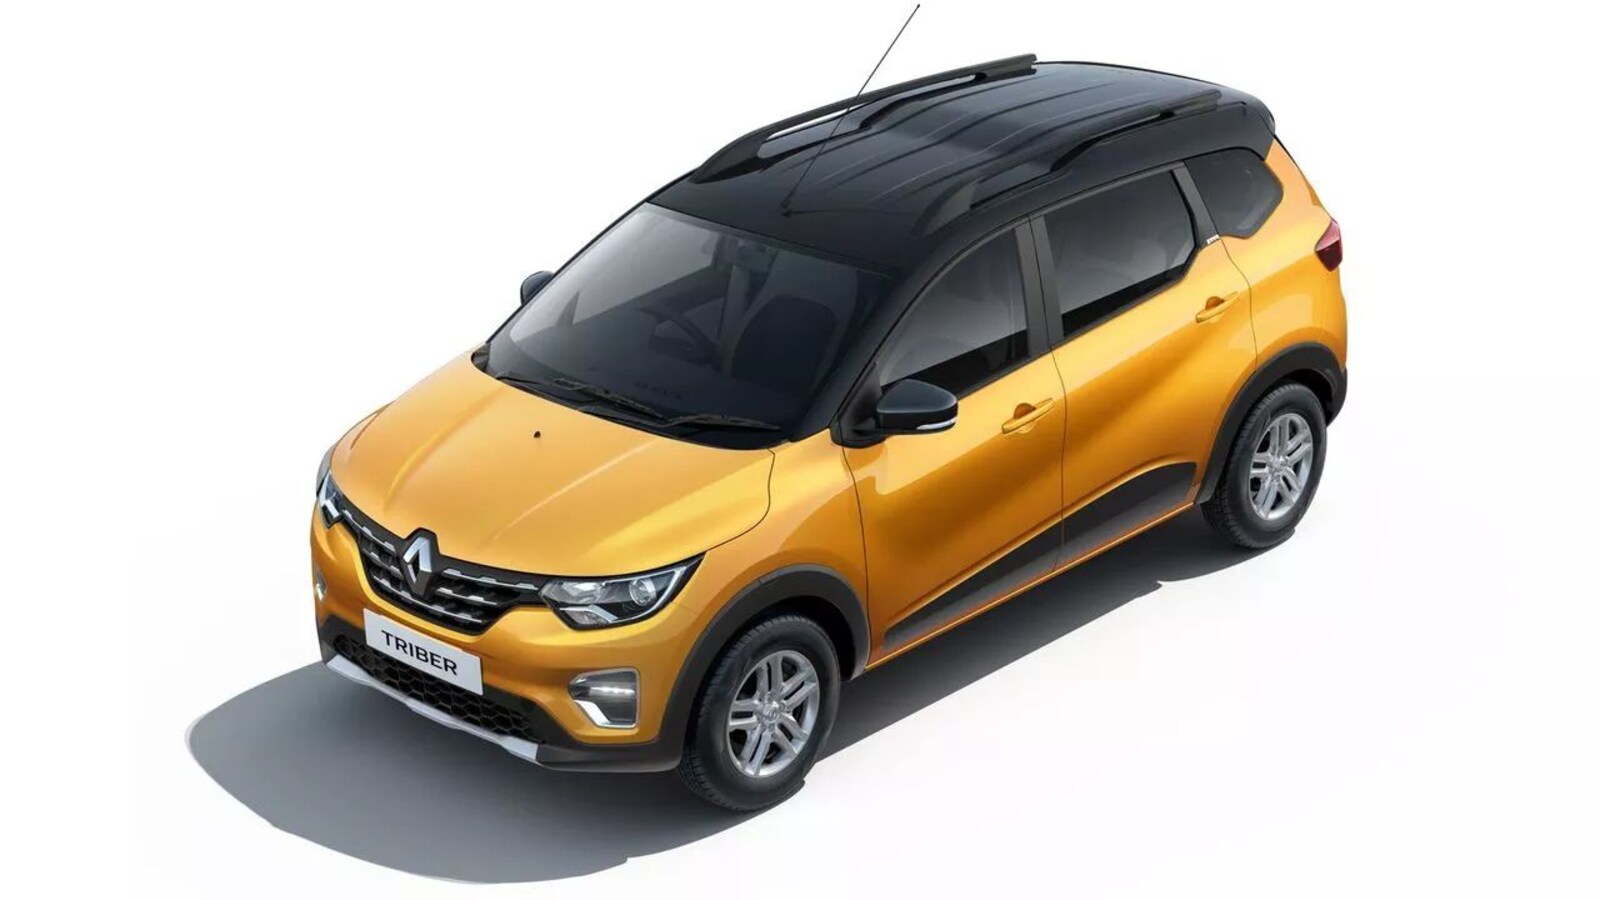 2021 Renault Triber launched at Rs 5.30 lakh with new dual-tone